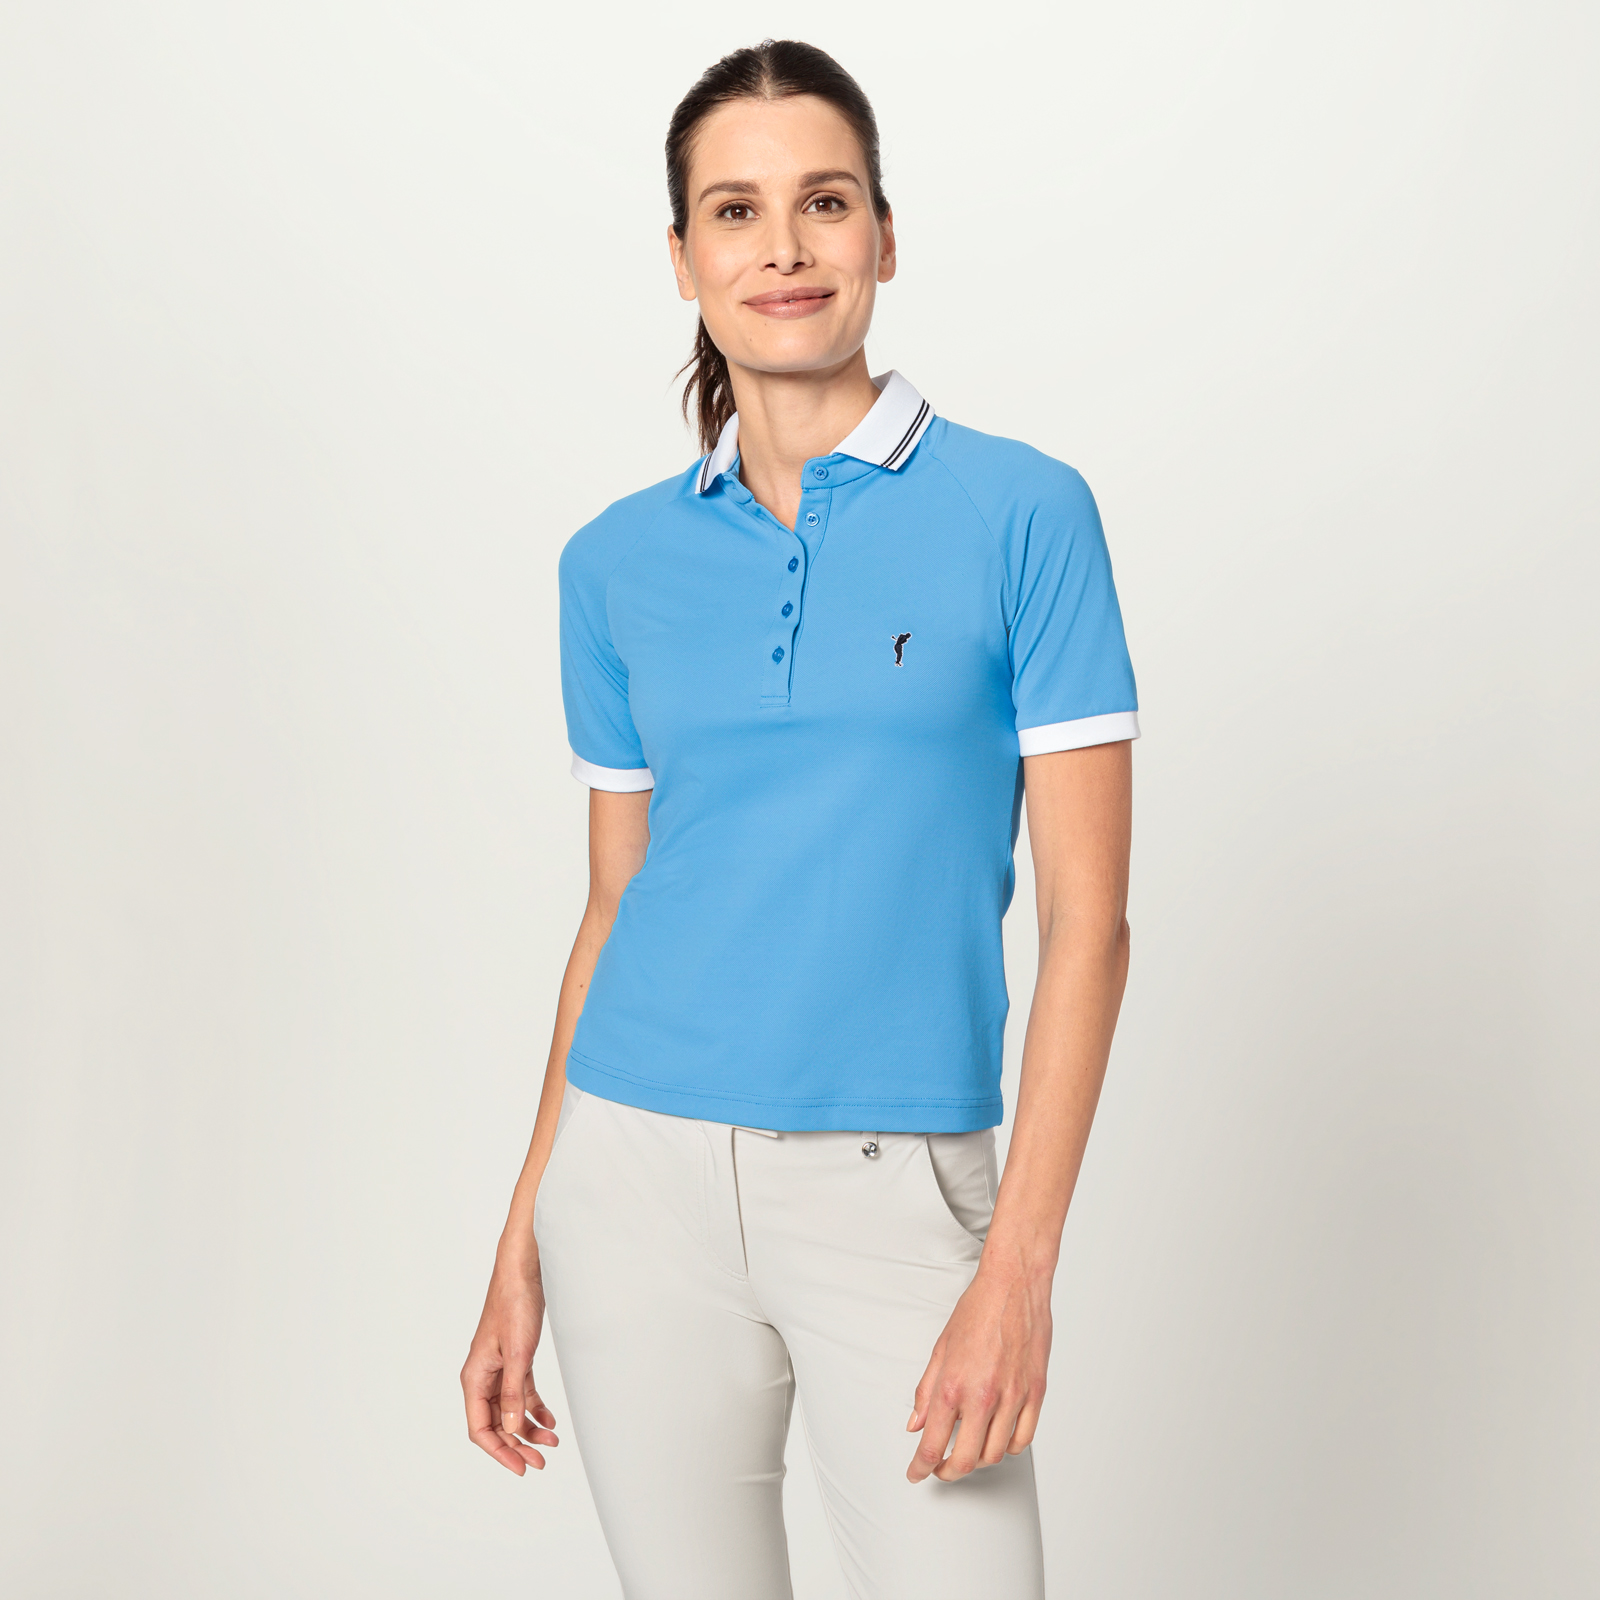 Ladies' sustainable zero pollution golf polo shirt with moisture management function 